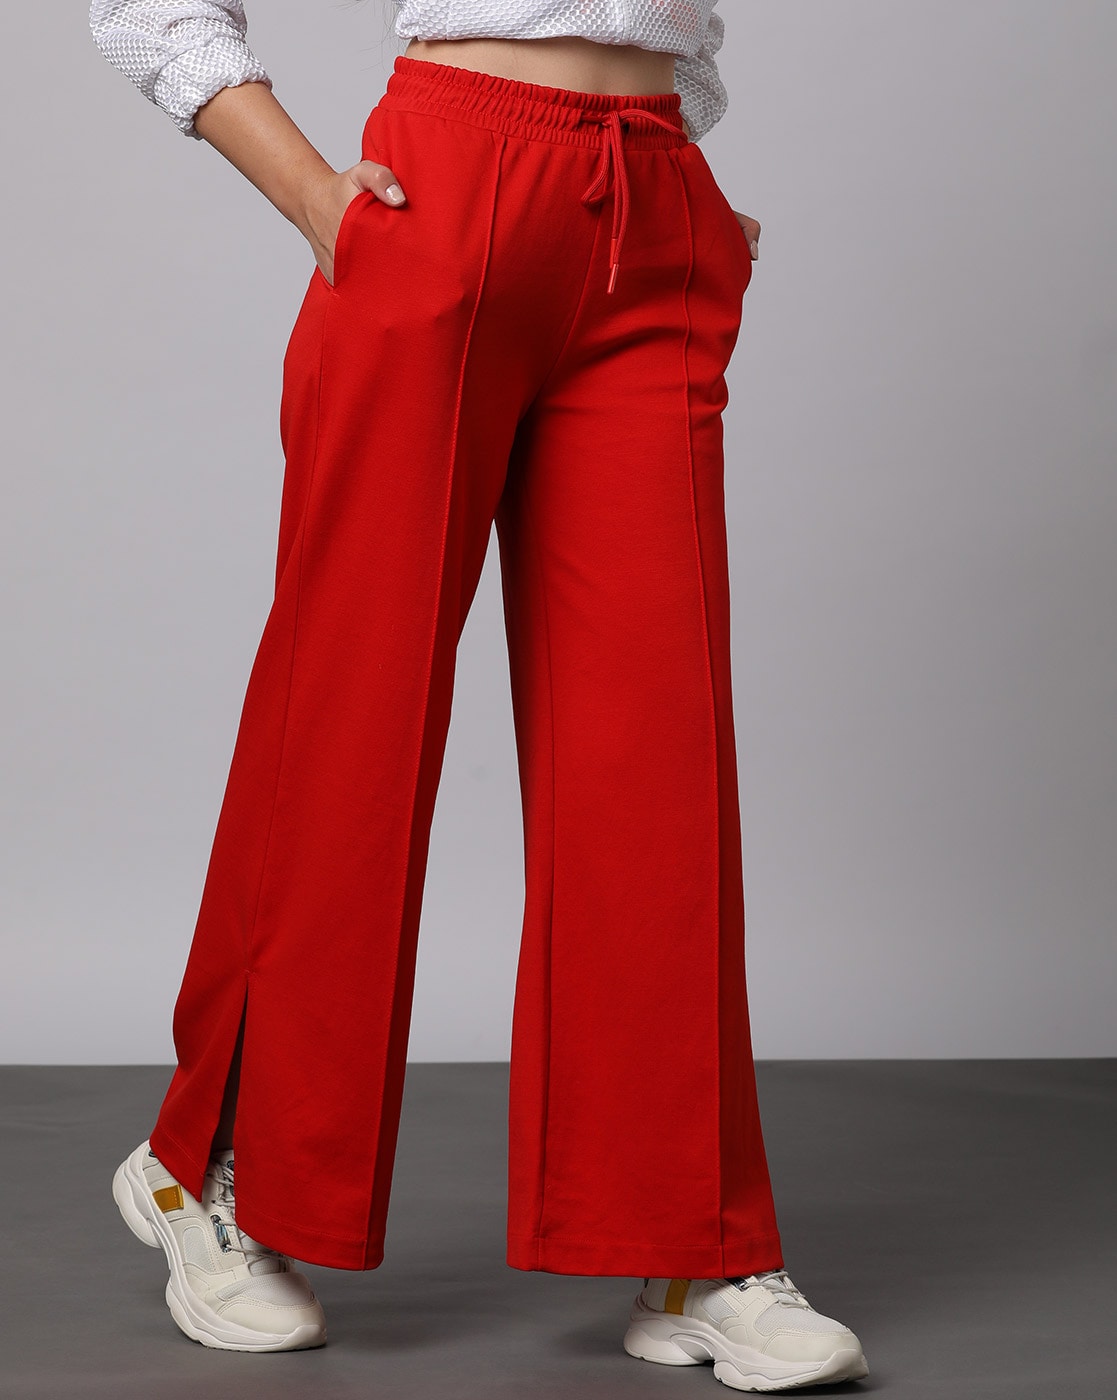 Buy Red Track Pants for Women by Outryt Sport Online  Ajiocom